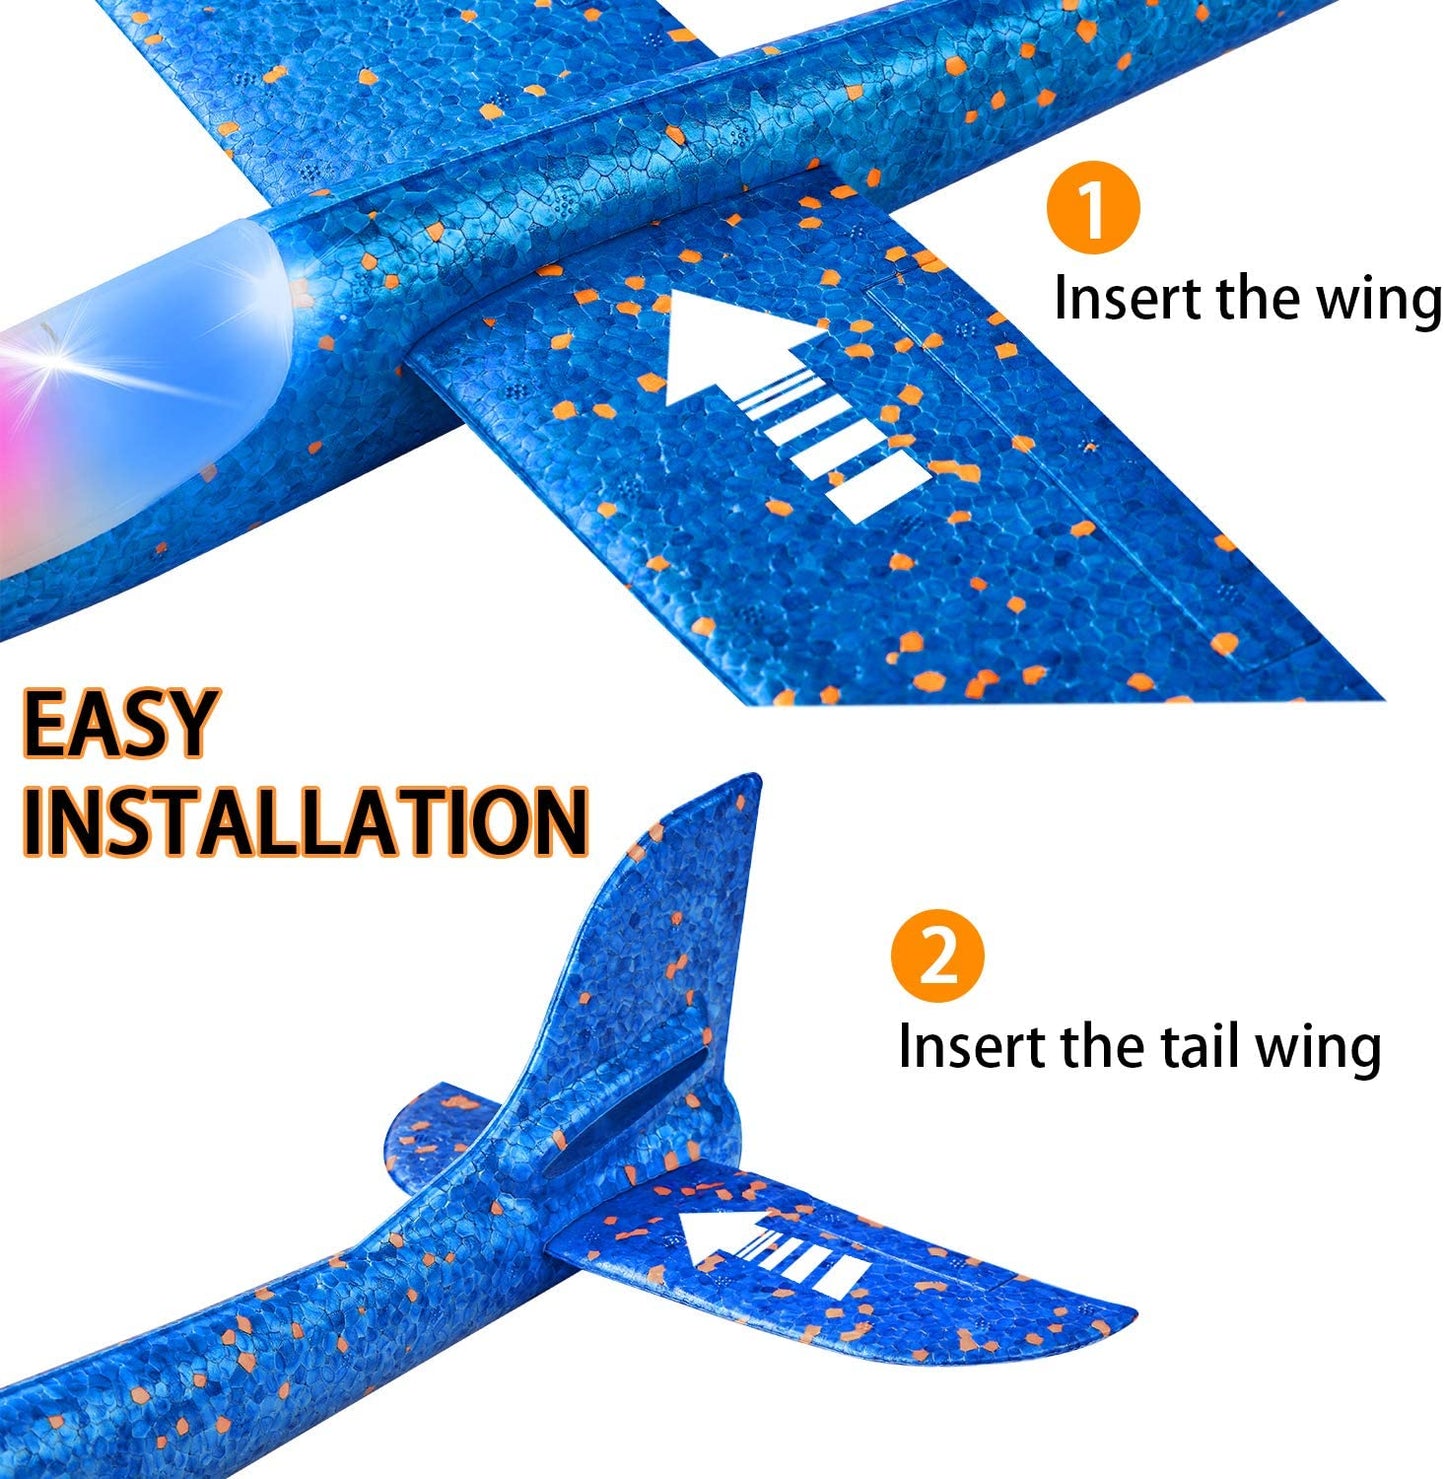 50cm Big Foam Plane Flying Glider Toy With Led Light Hand Throw